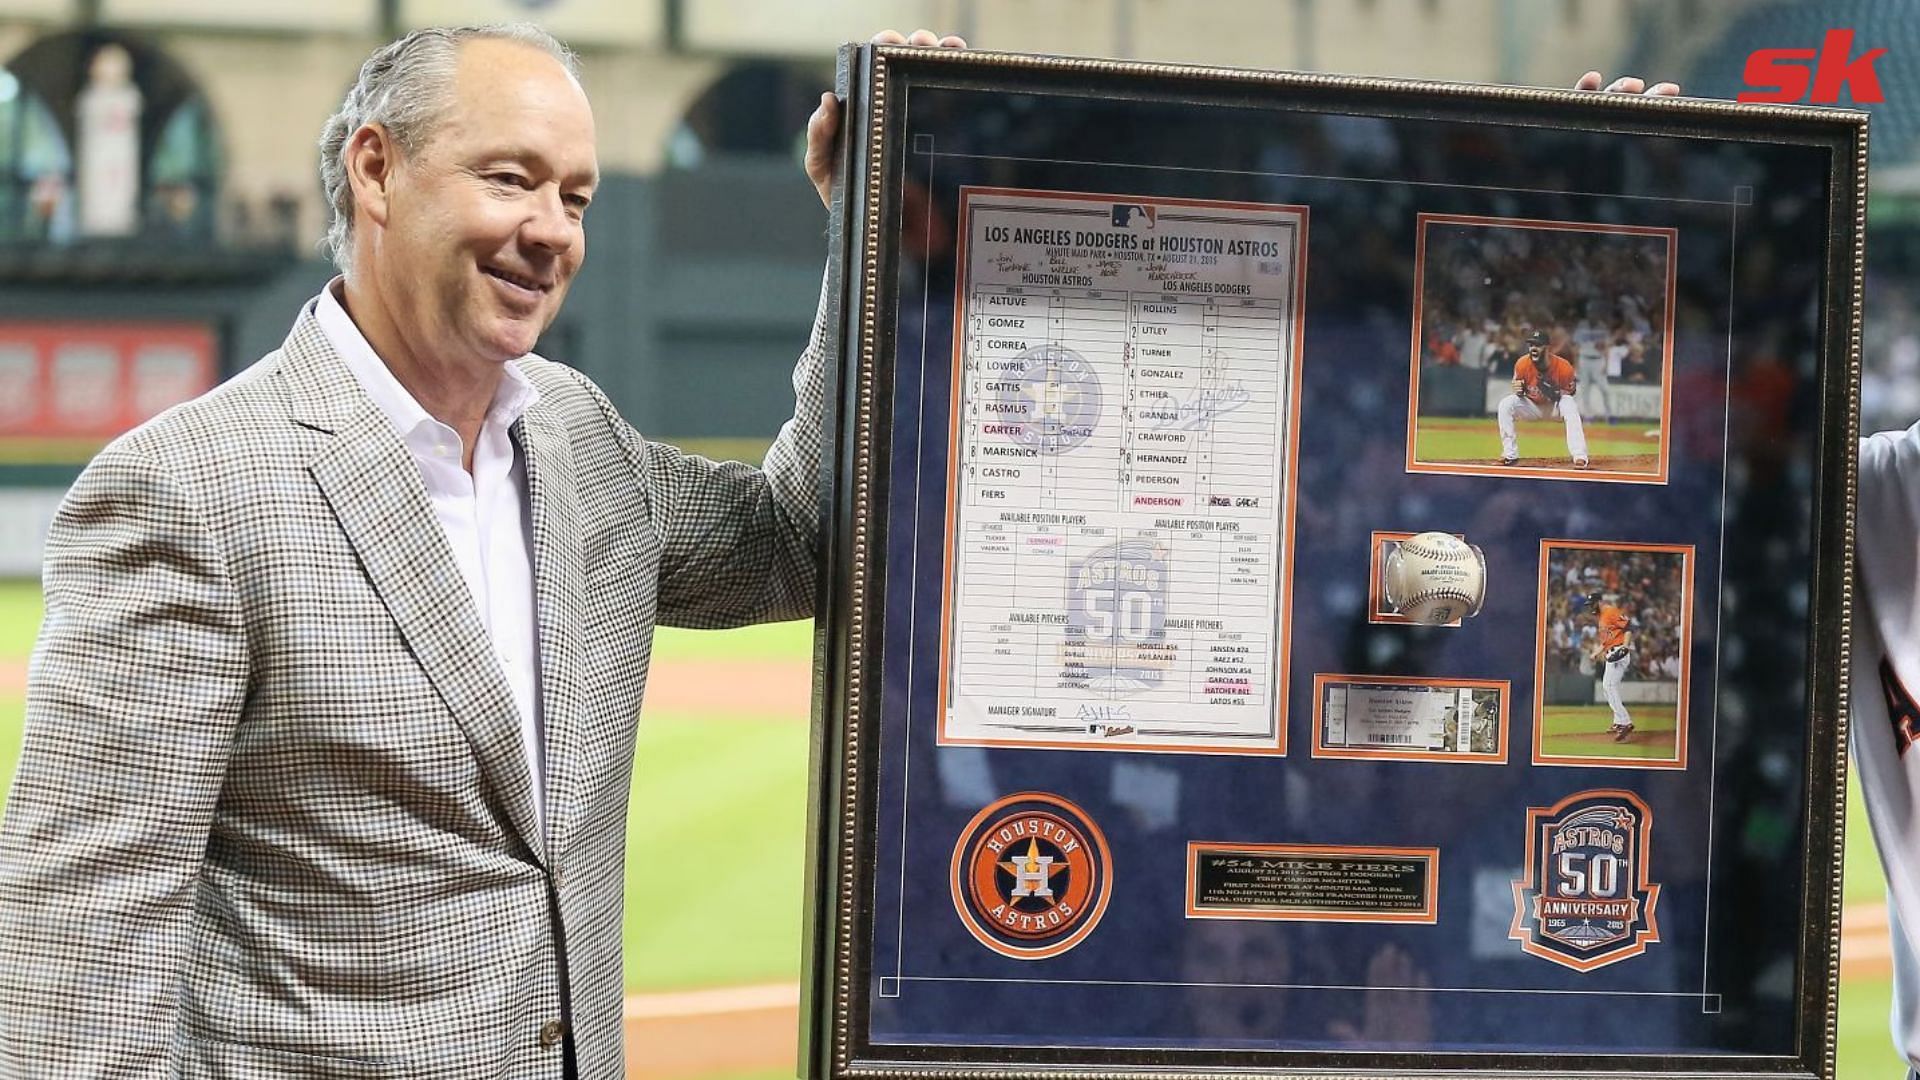 Astros cheating scandal: Jim Crane doesn't want to be 'held